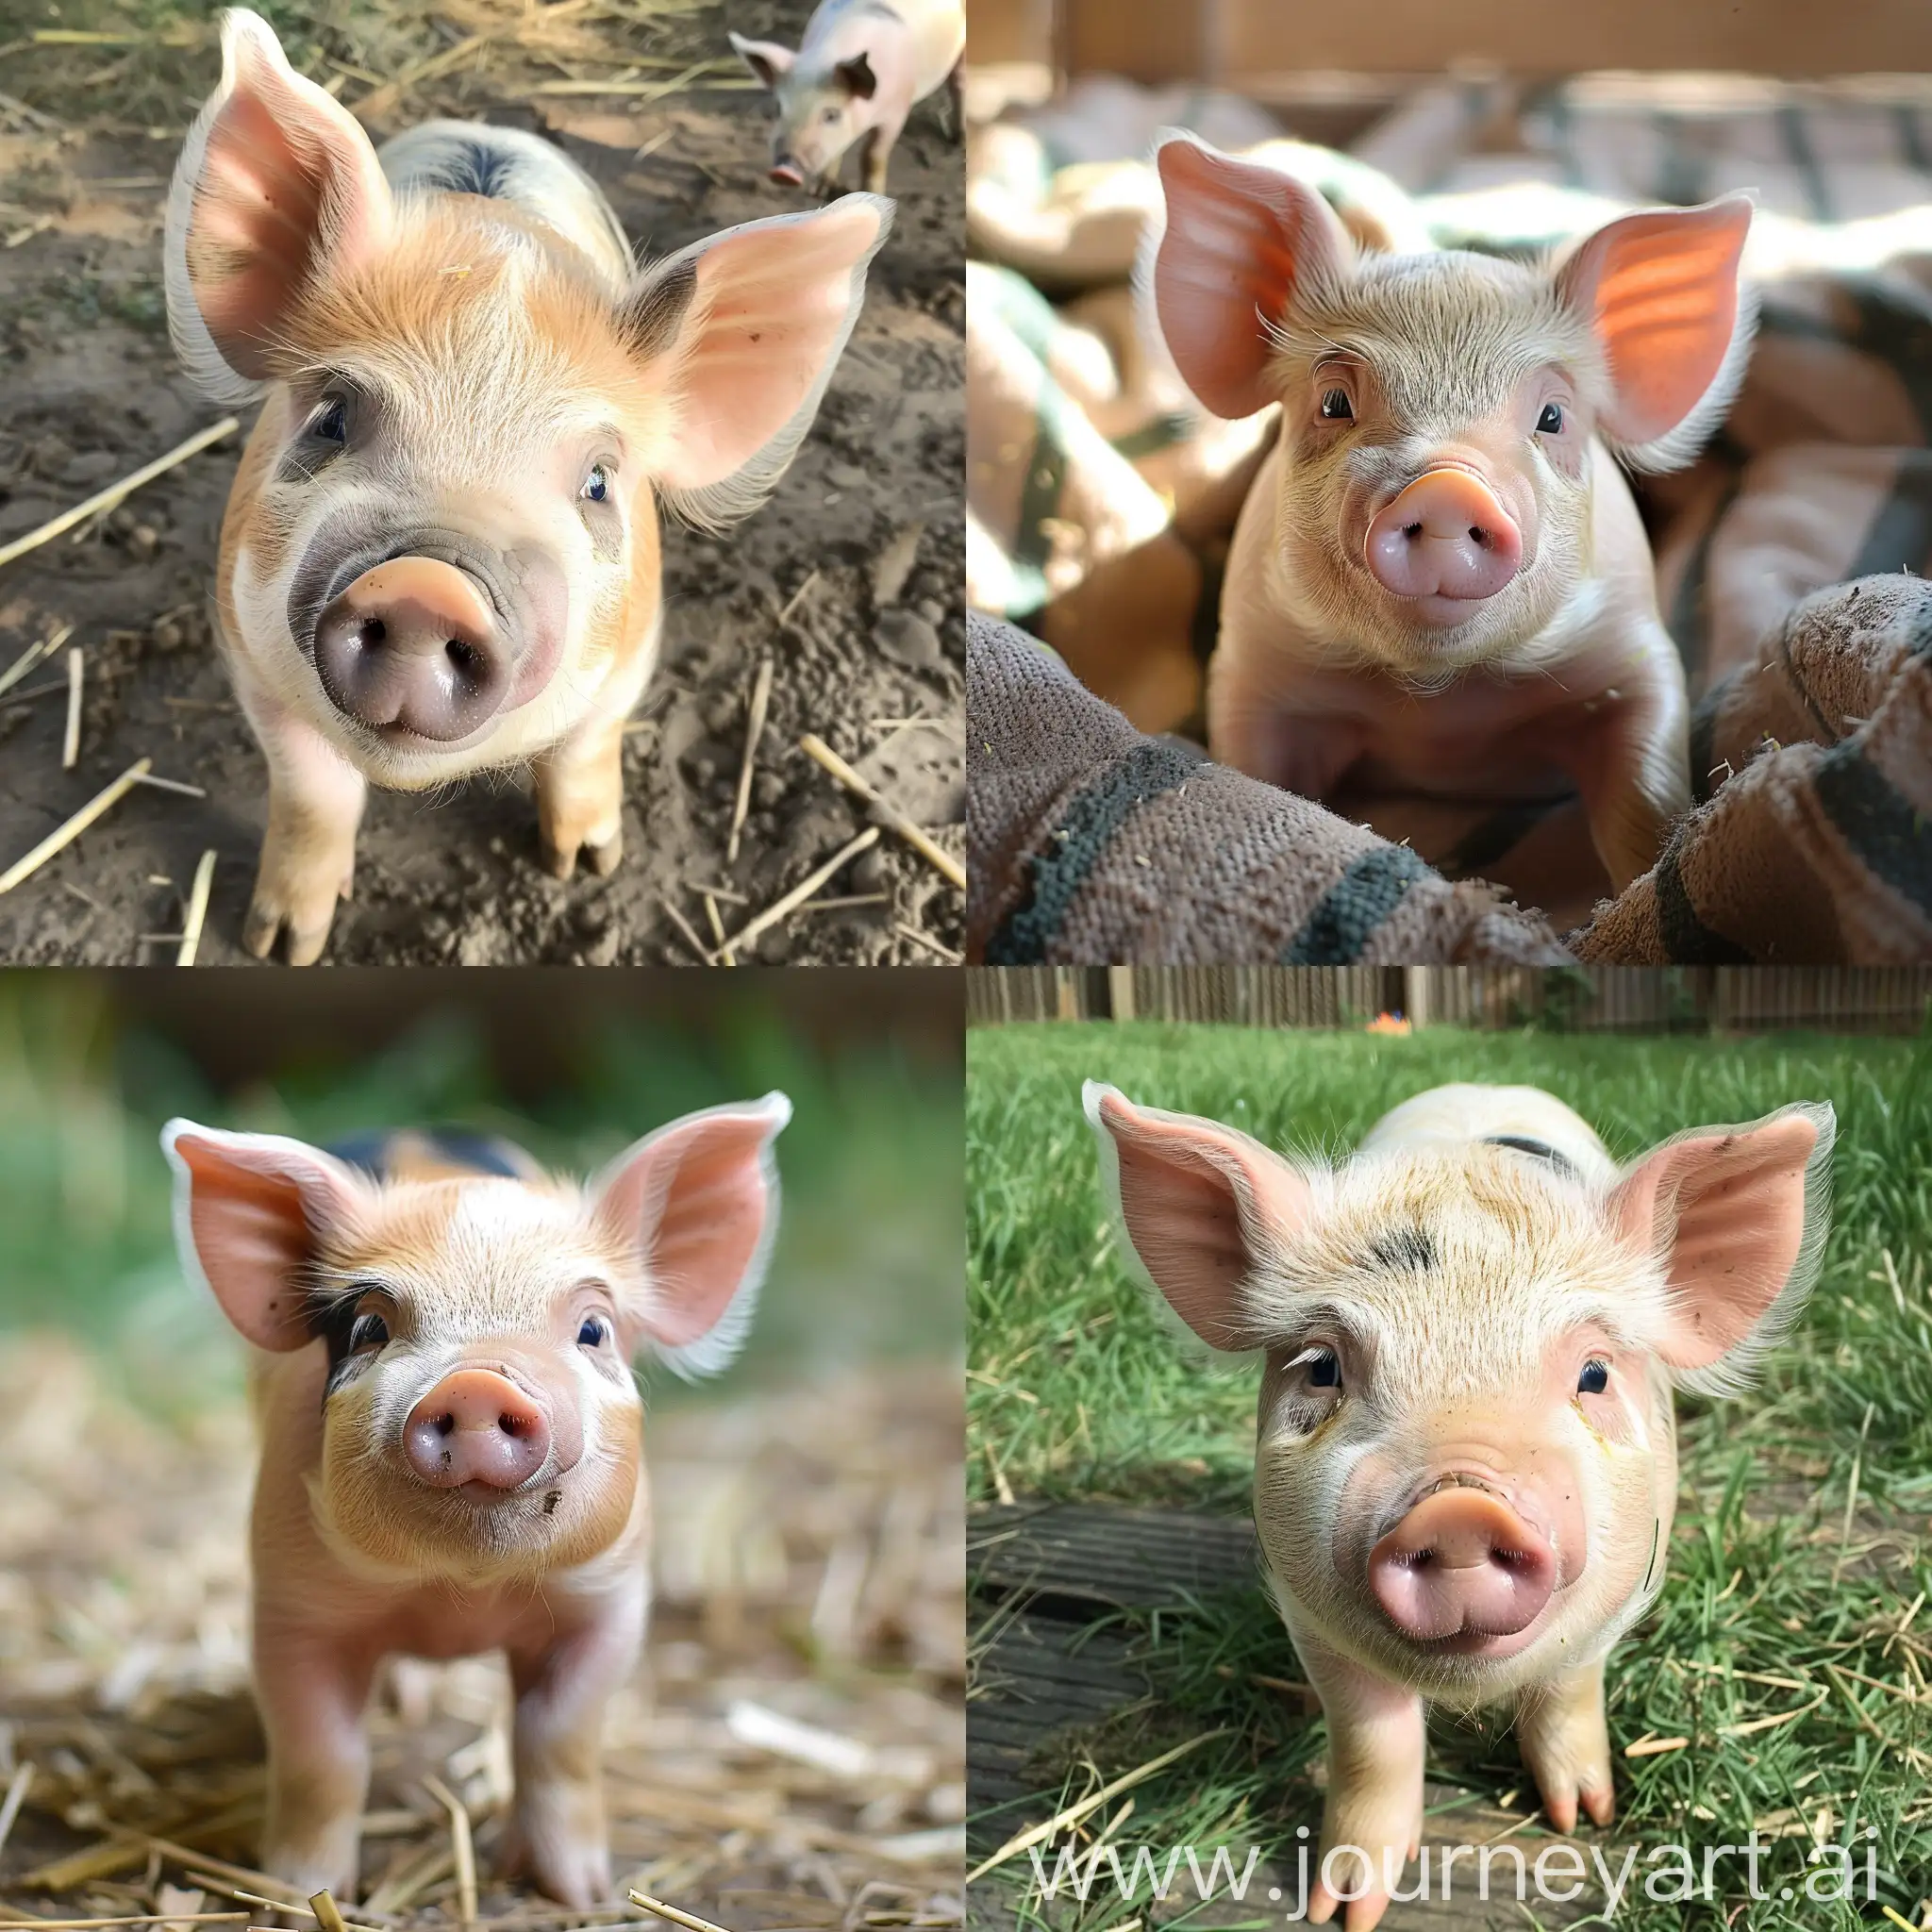 Adorable-Pig-with-a-Vibrant-Personality-AI-Generated-Image